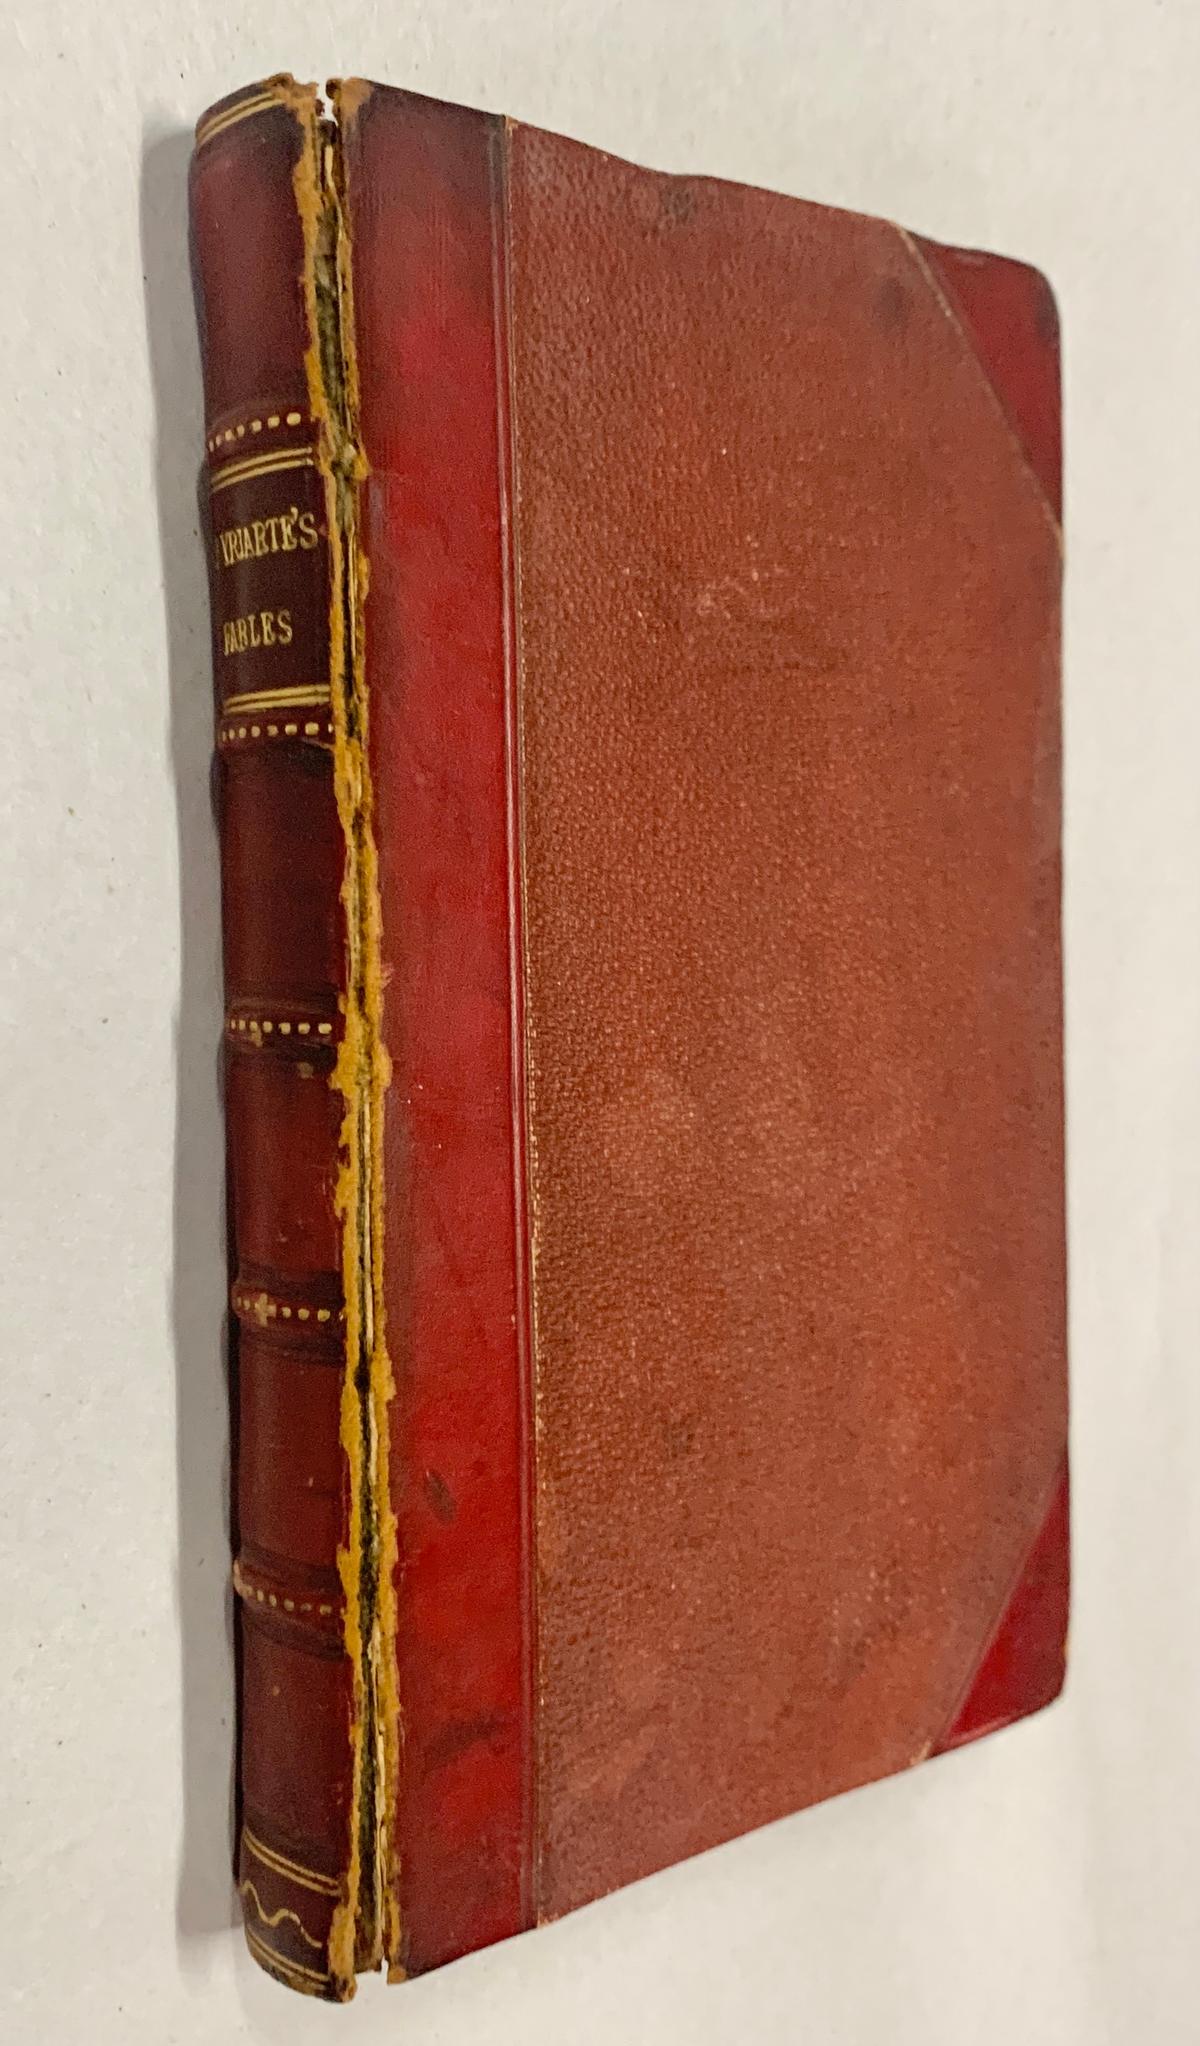 RARE Fables Connected with Literature (1804) Translated from the Spanish